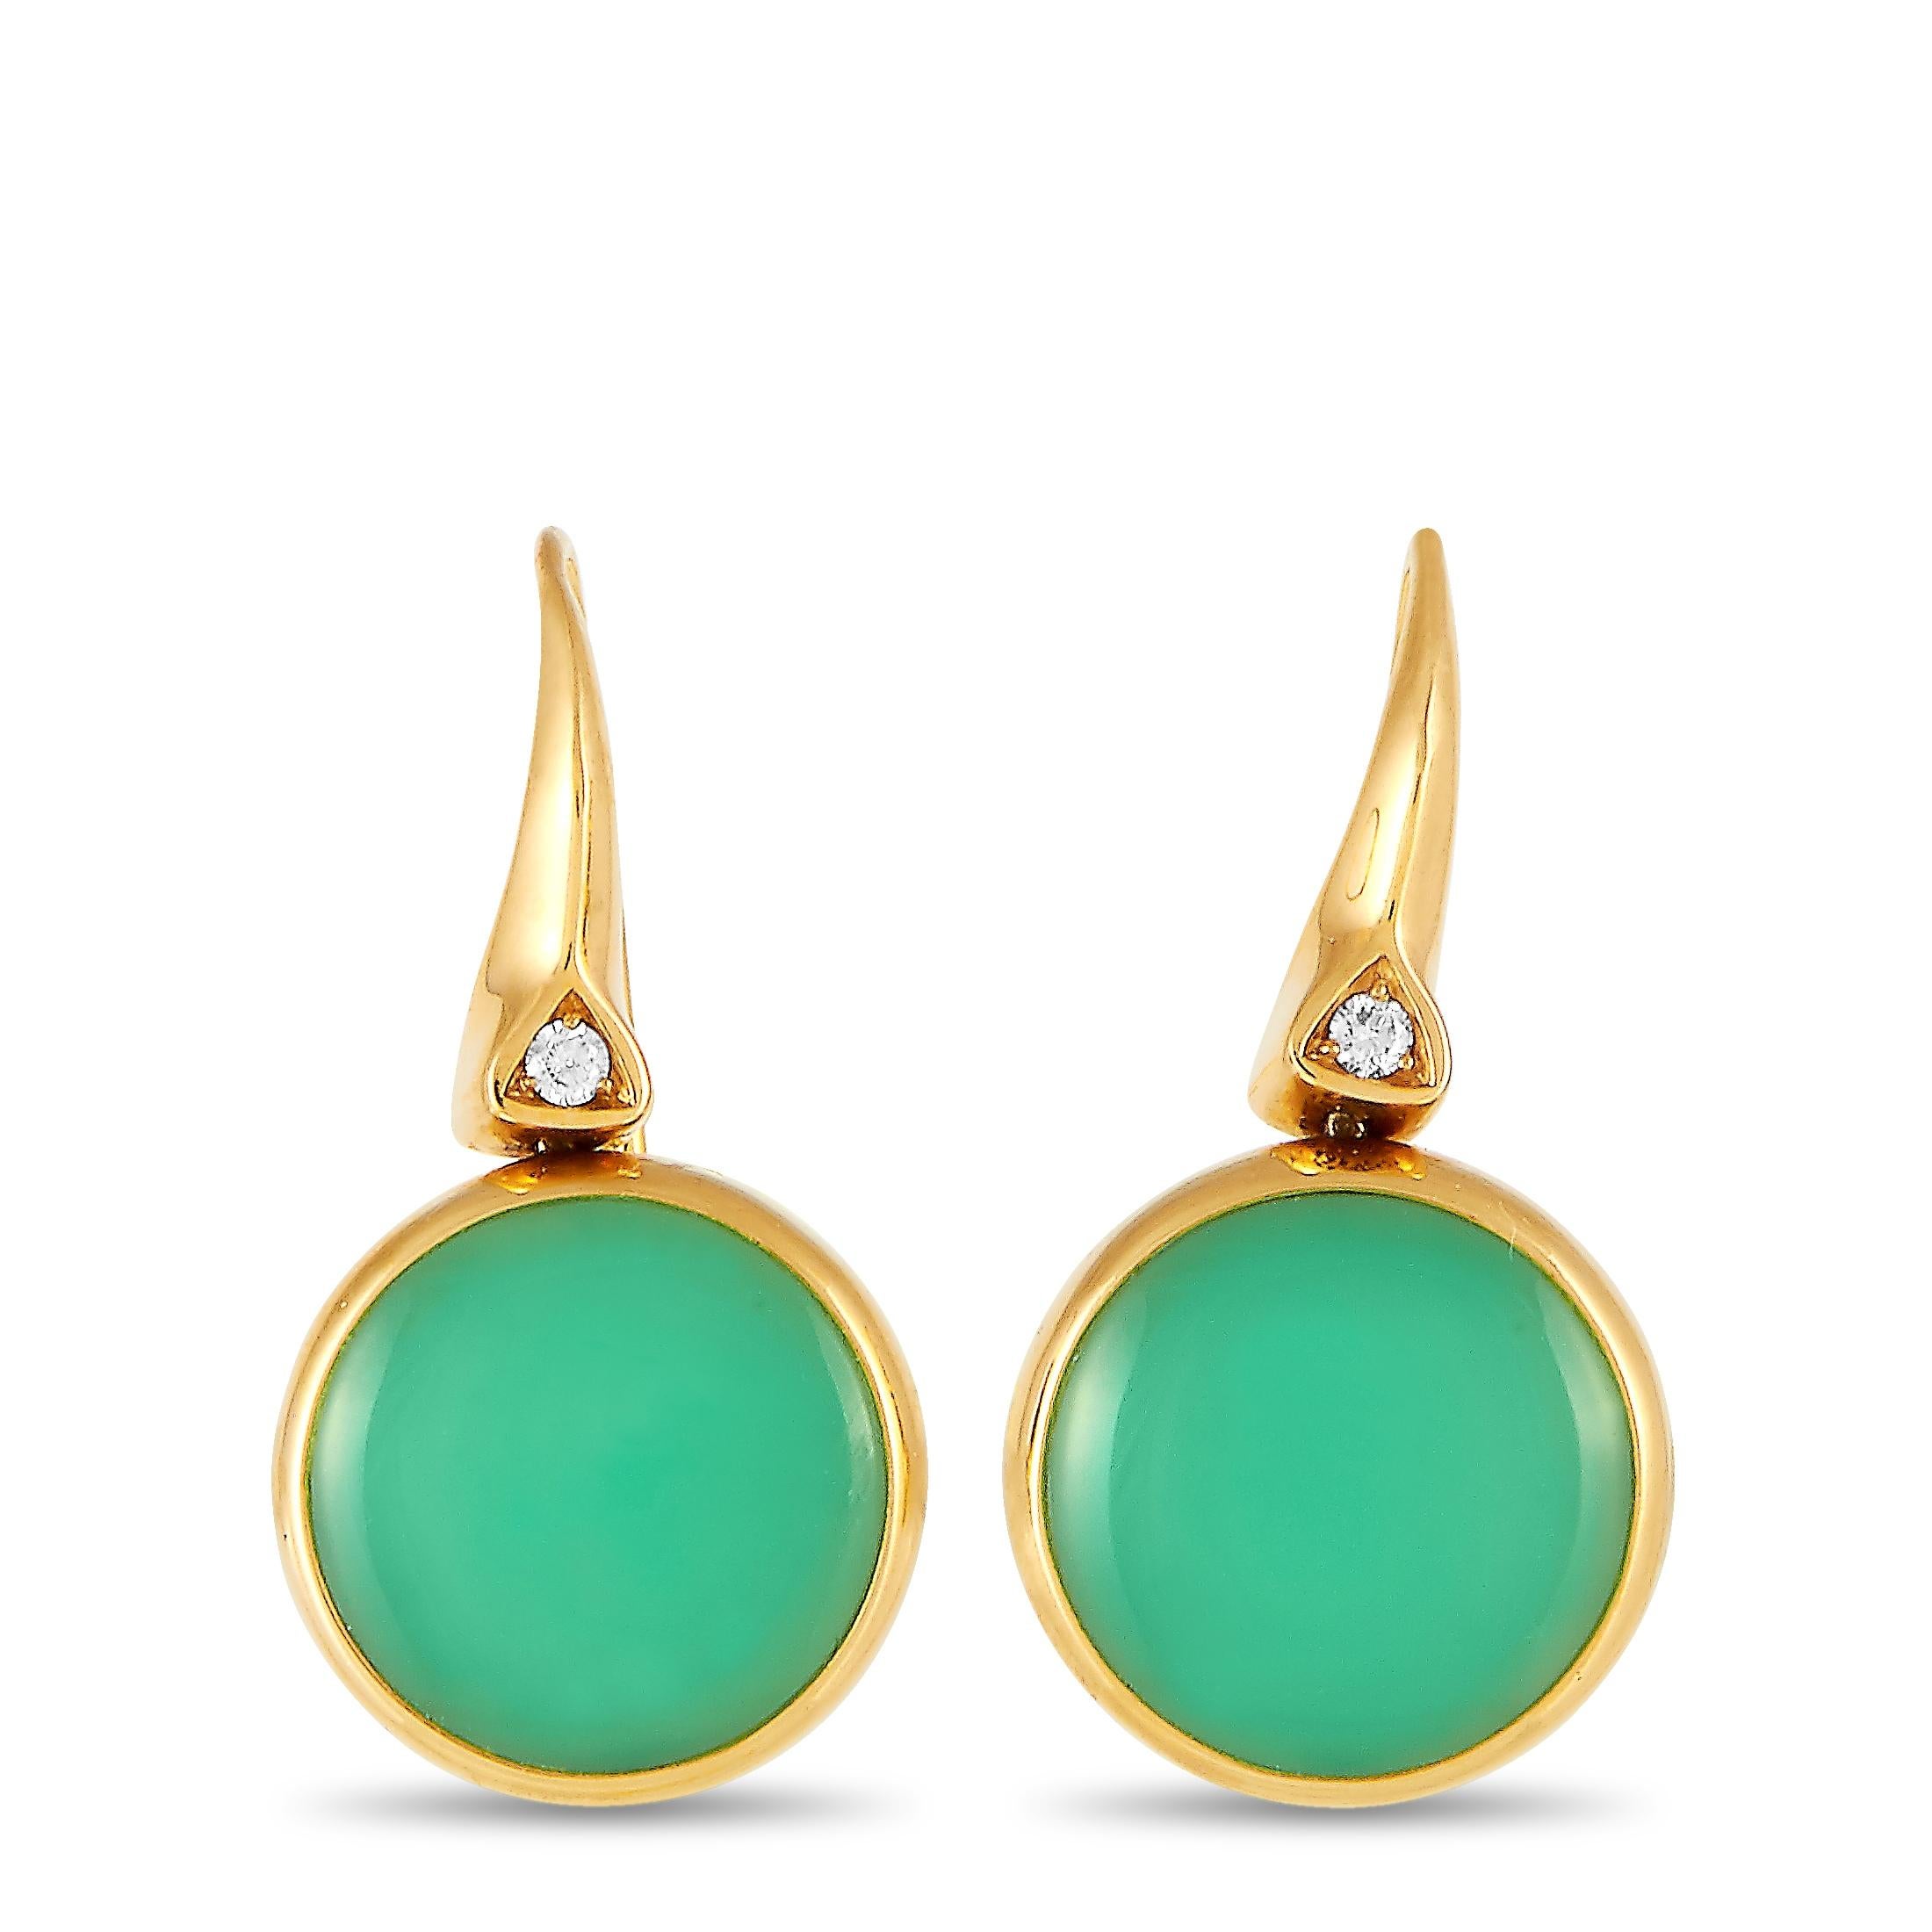 The Vhernier “Girotondo” earrings are made of 18K rose gold and embellished with adularia and chrysoprase stones and a total of 0.06 carats of diamonds. The earrings measure 1.10” in length and 0.60” in width, and each of the two weighs 6.25